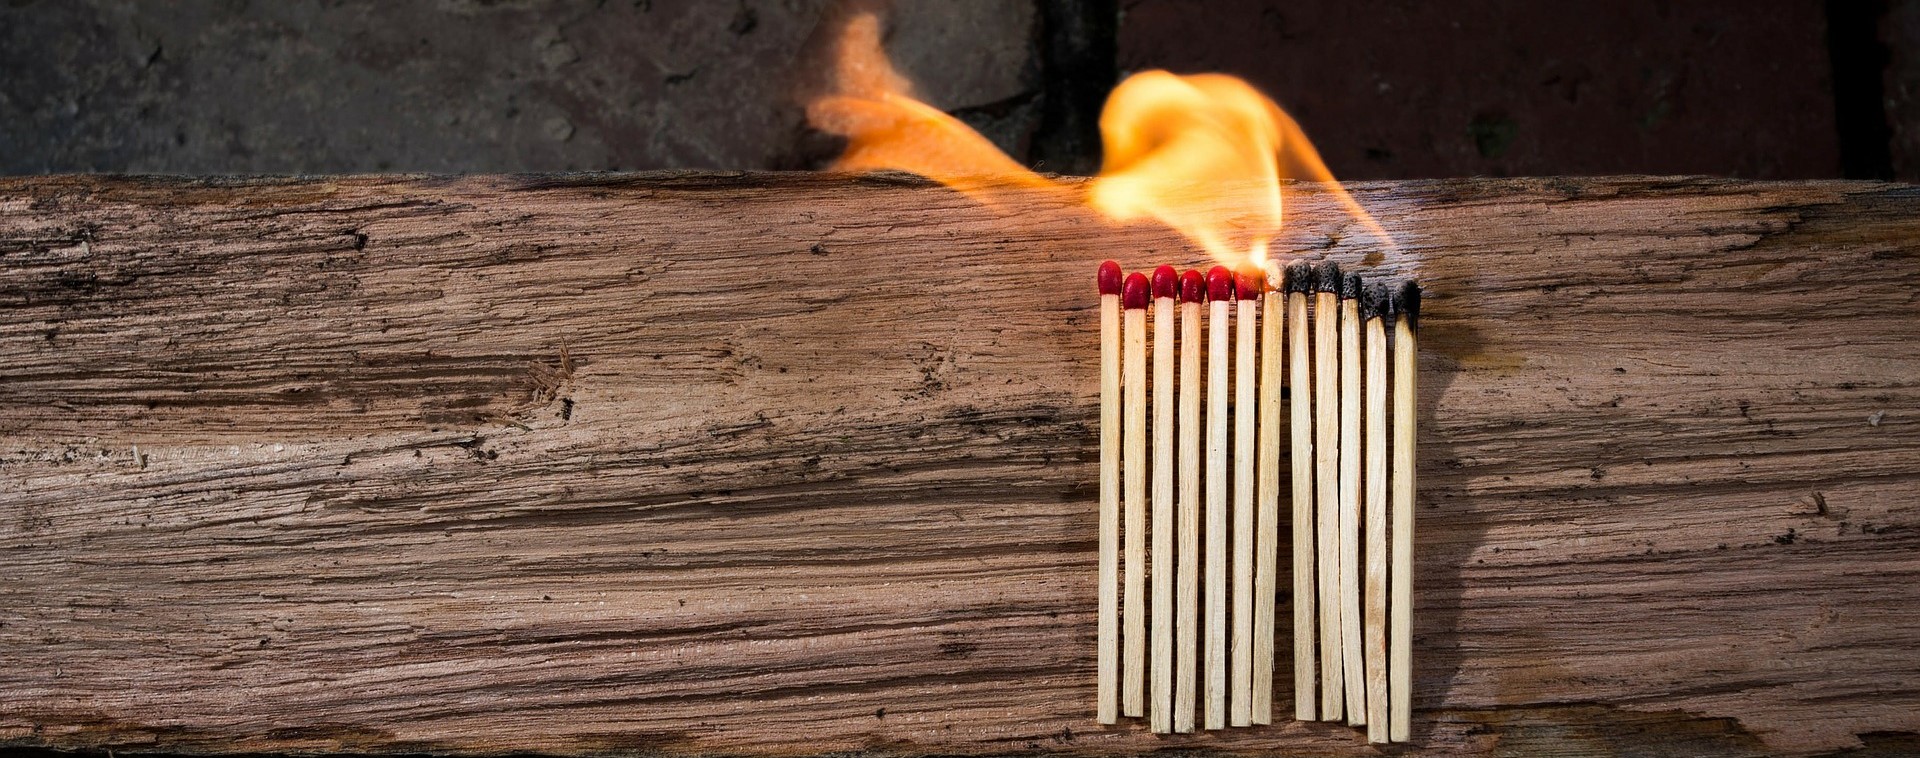 Chain Reaction of Matches Burning